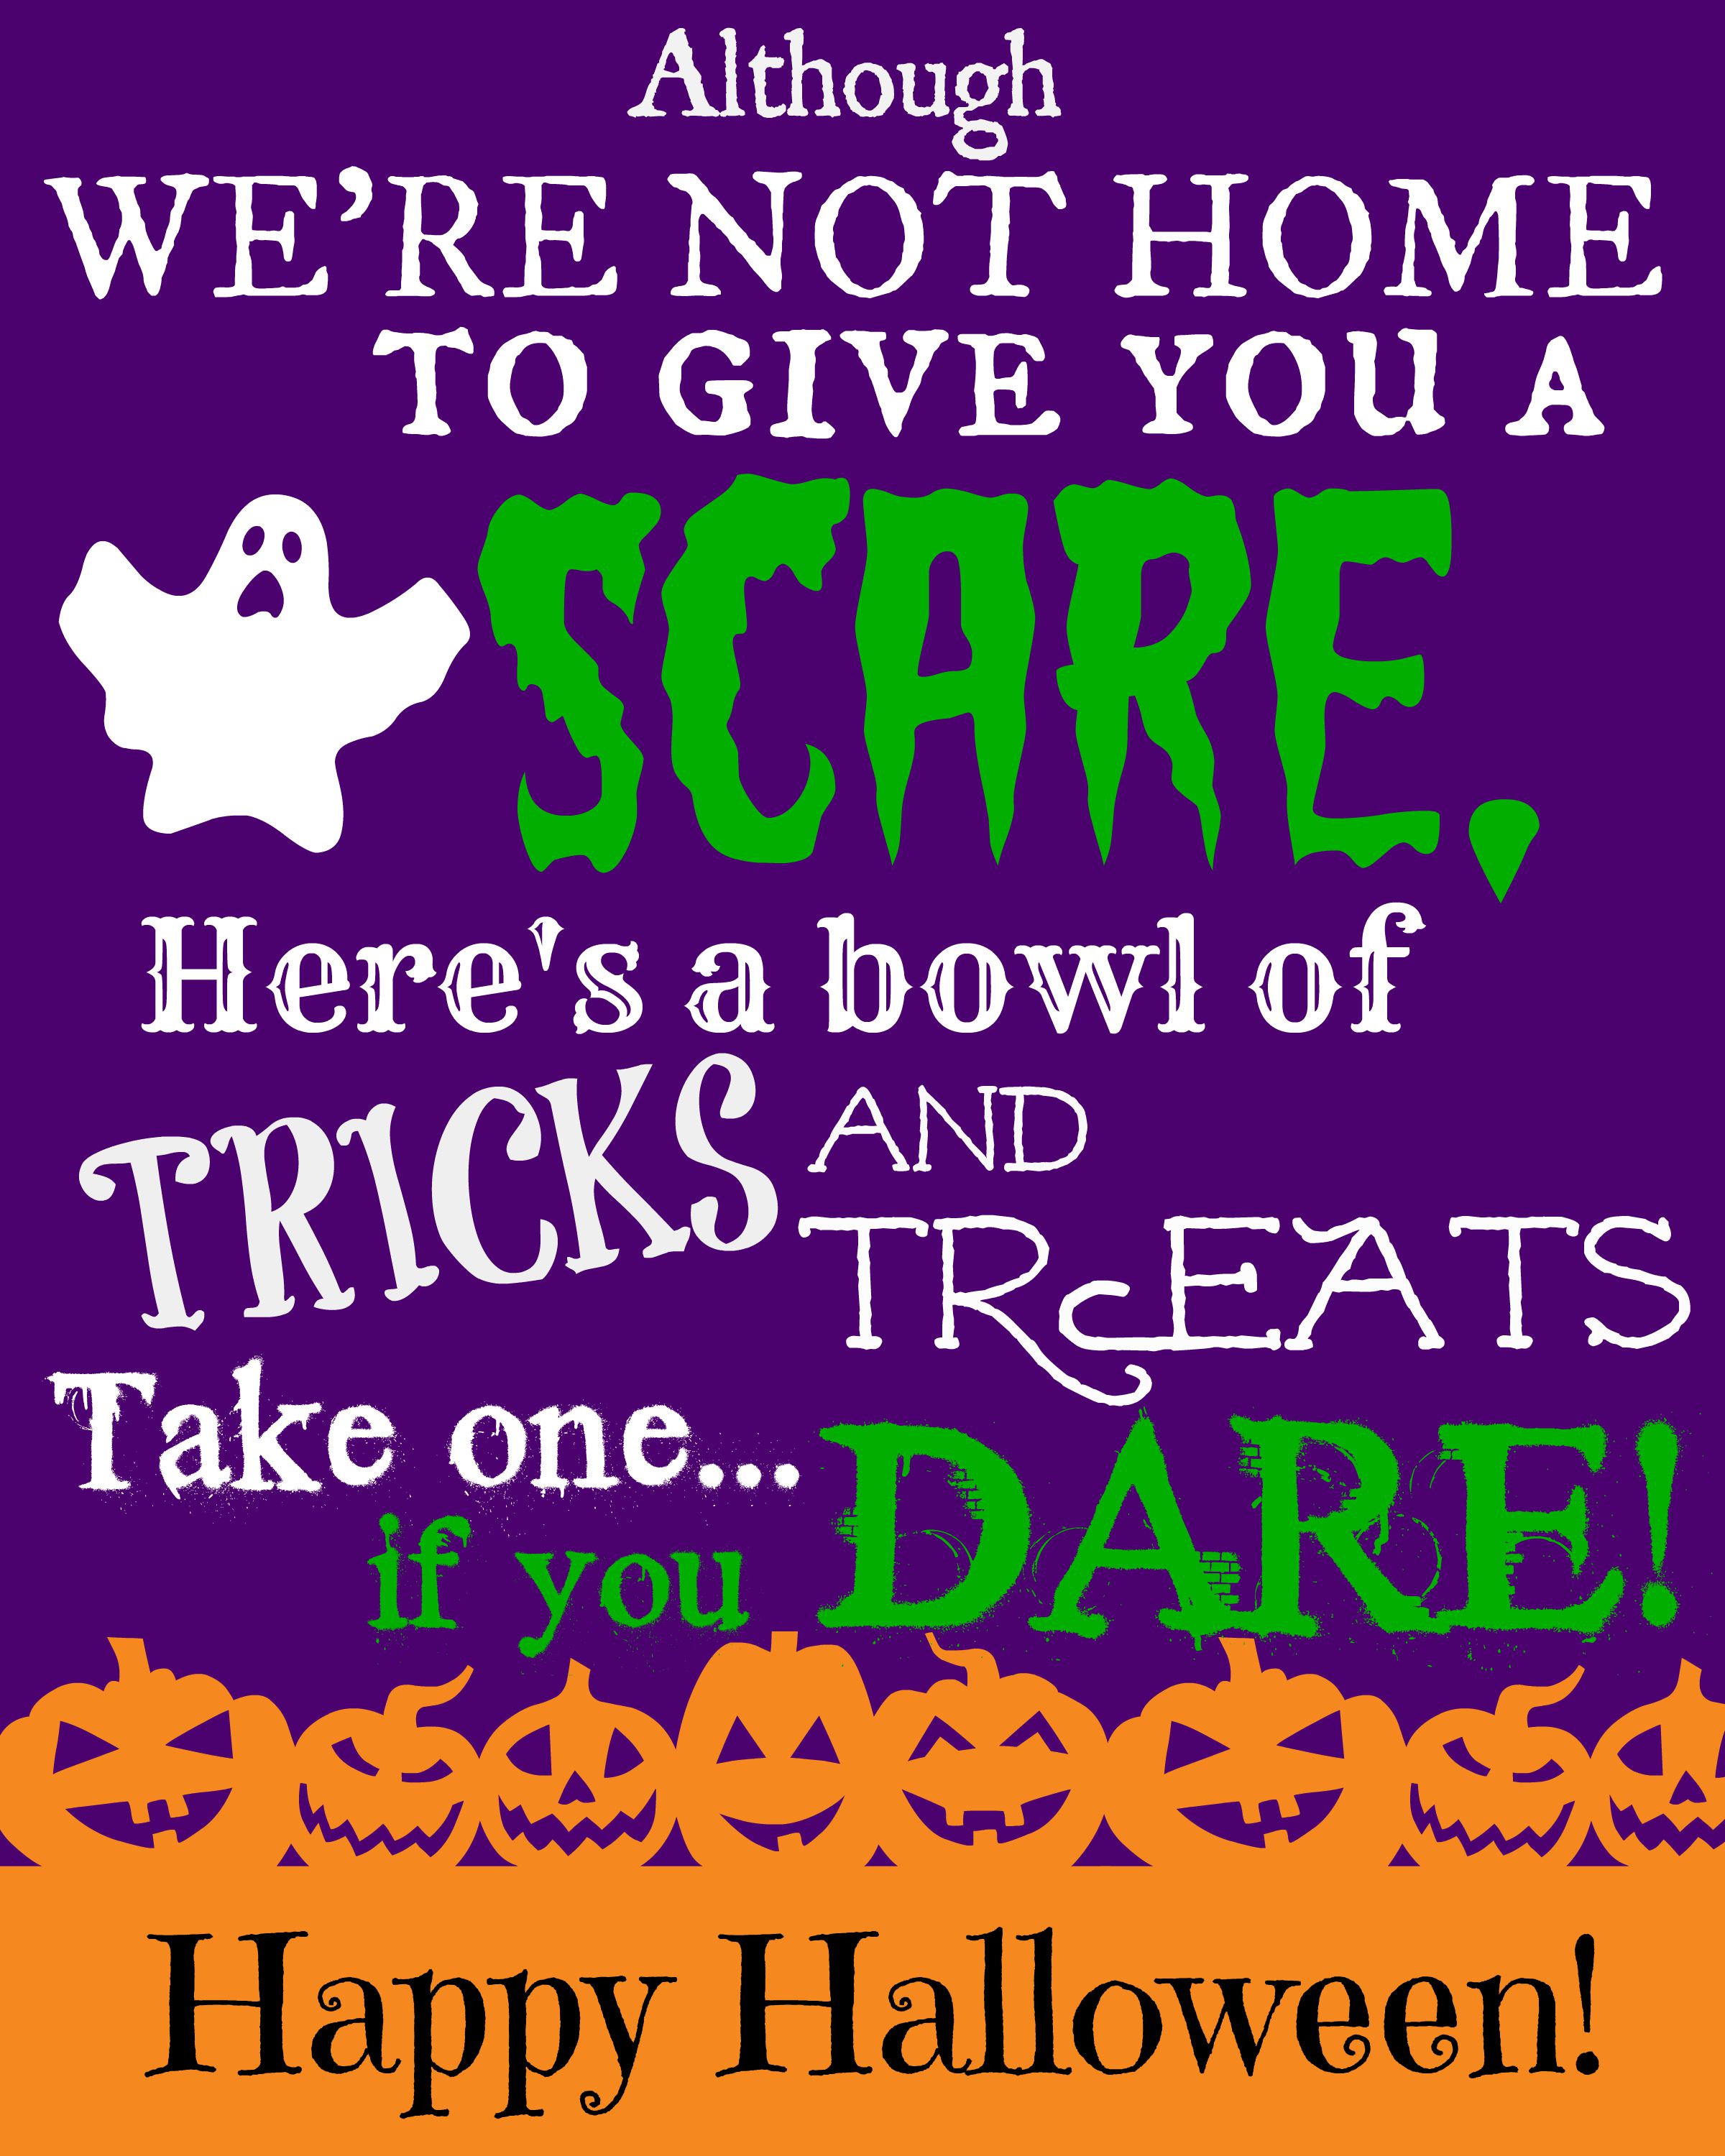 Free Printable Sign with Halloween Poem for Trick or Treaters